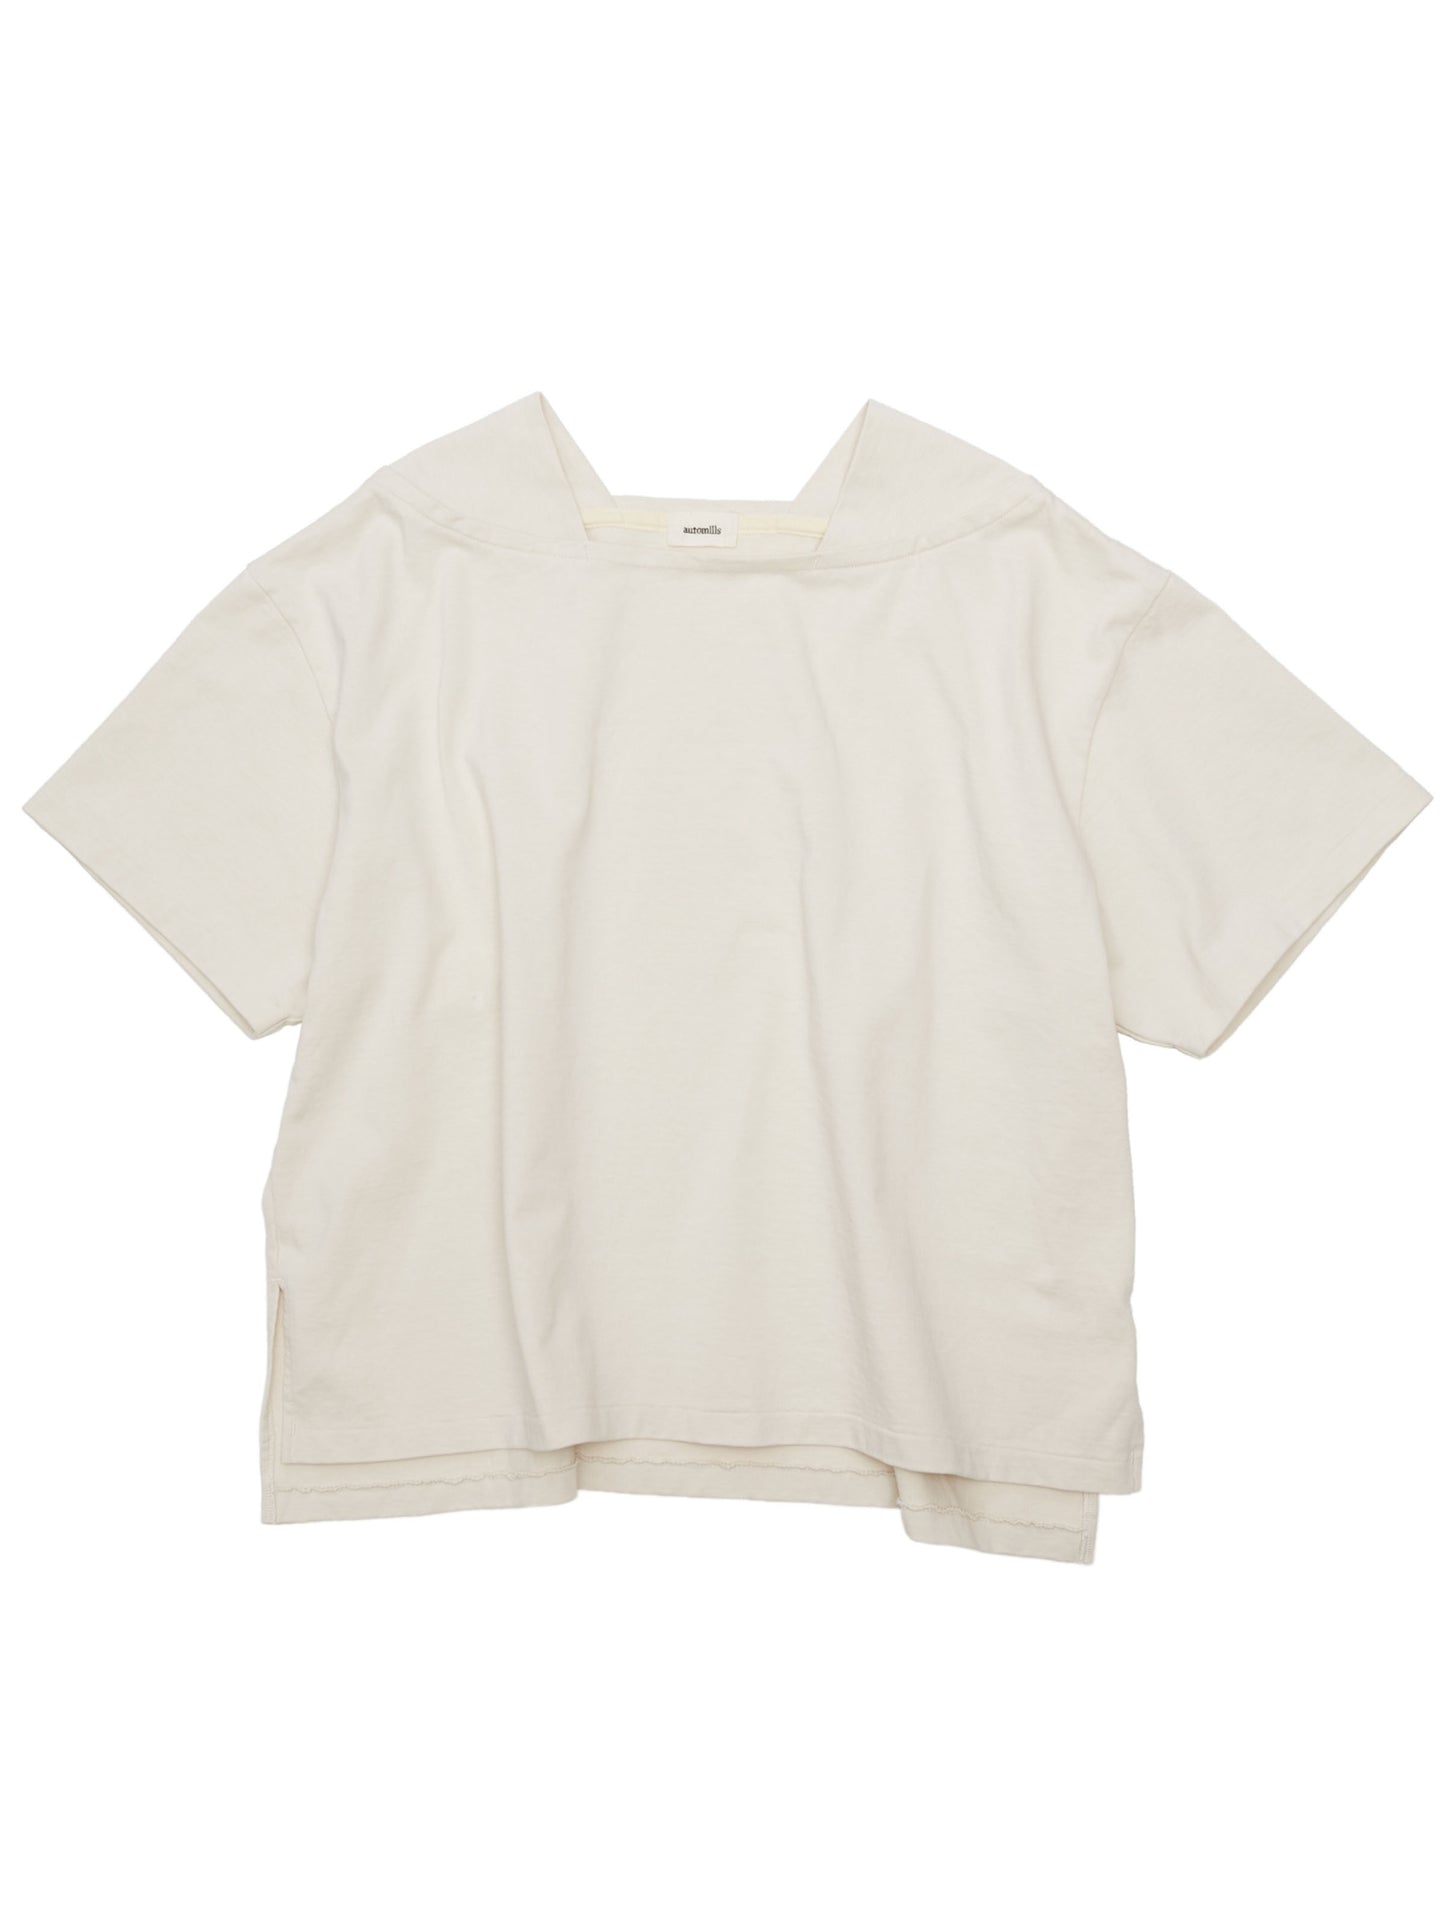 BAGGY BOAT S/S TEE COTTON JERSEY AM-C0206 Natural